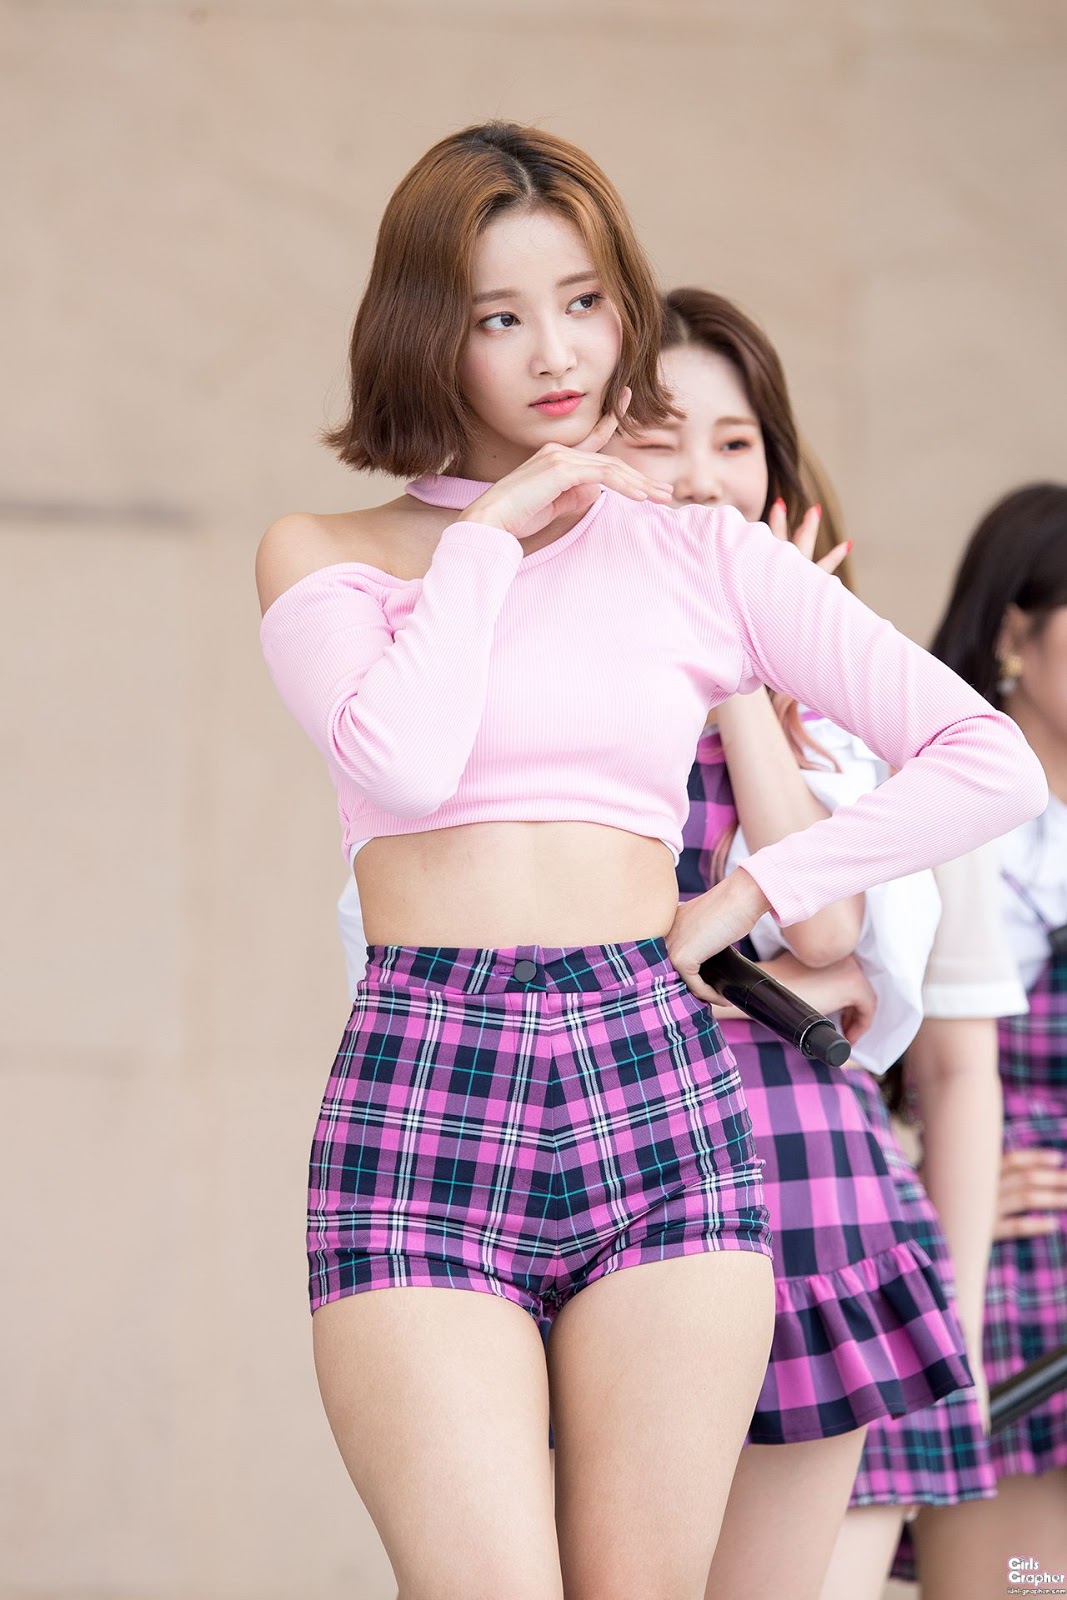 MOMOLAND Yeonwoo makes her fan cry for more photos.